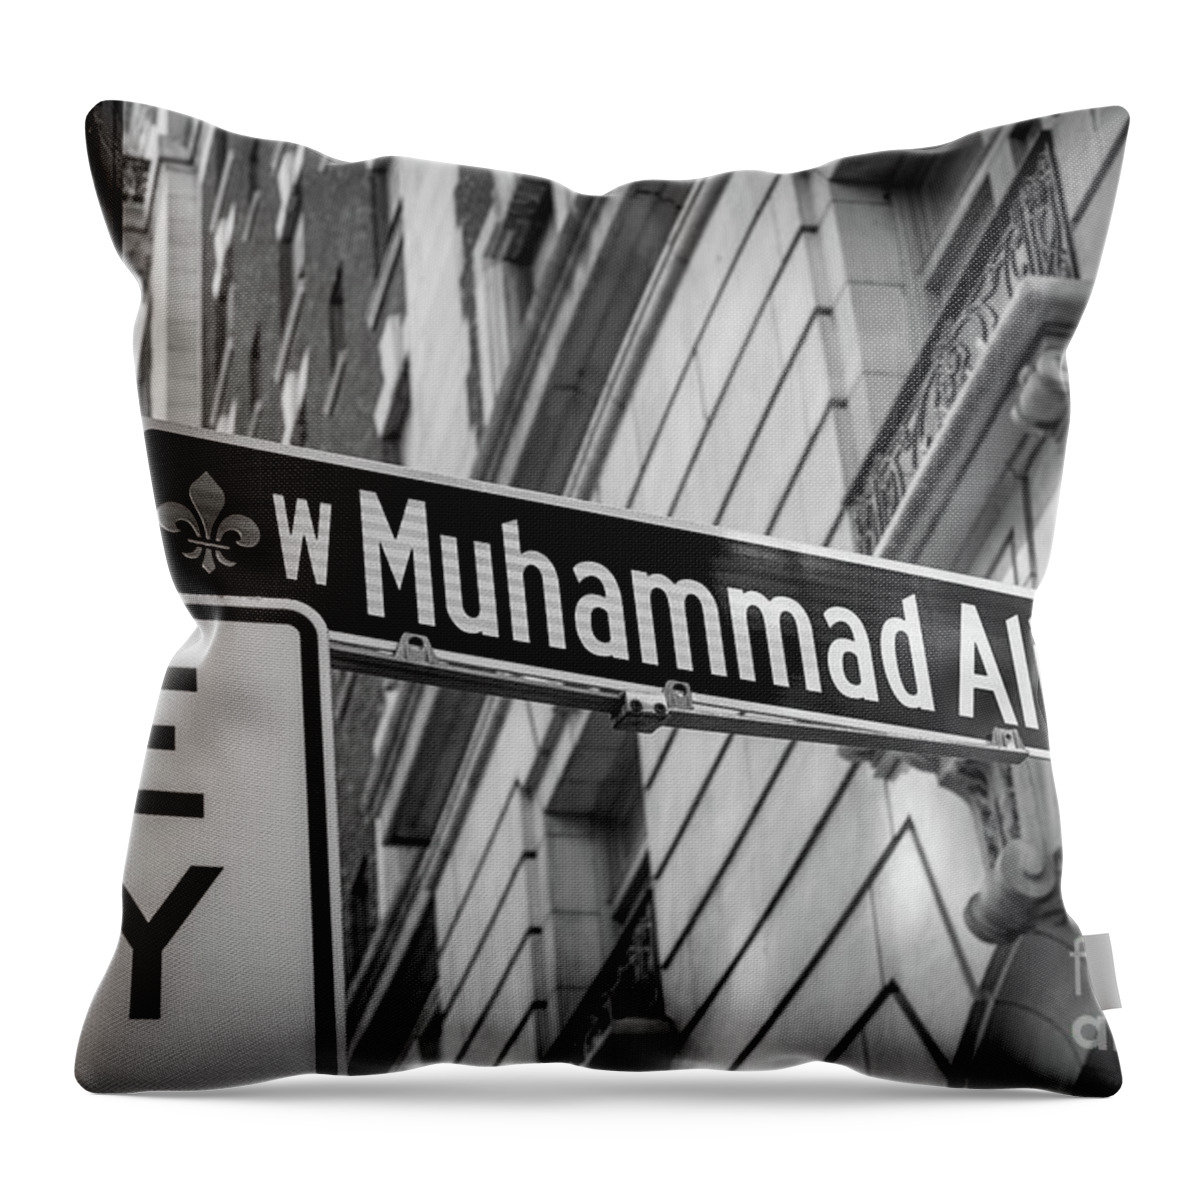 Muhammad Ali Sign Throw Pillow featuring the photograph Muhammad Ali Blvd Sign - Louisville - Kentucky by Gary Whitton